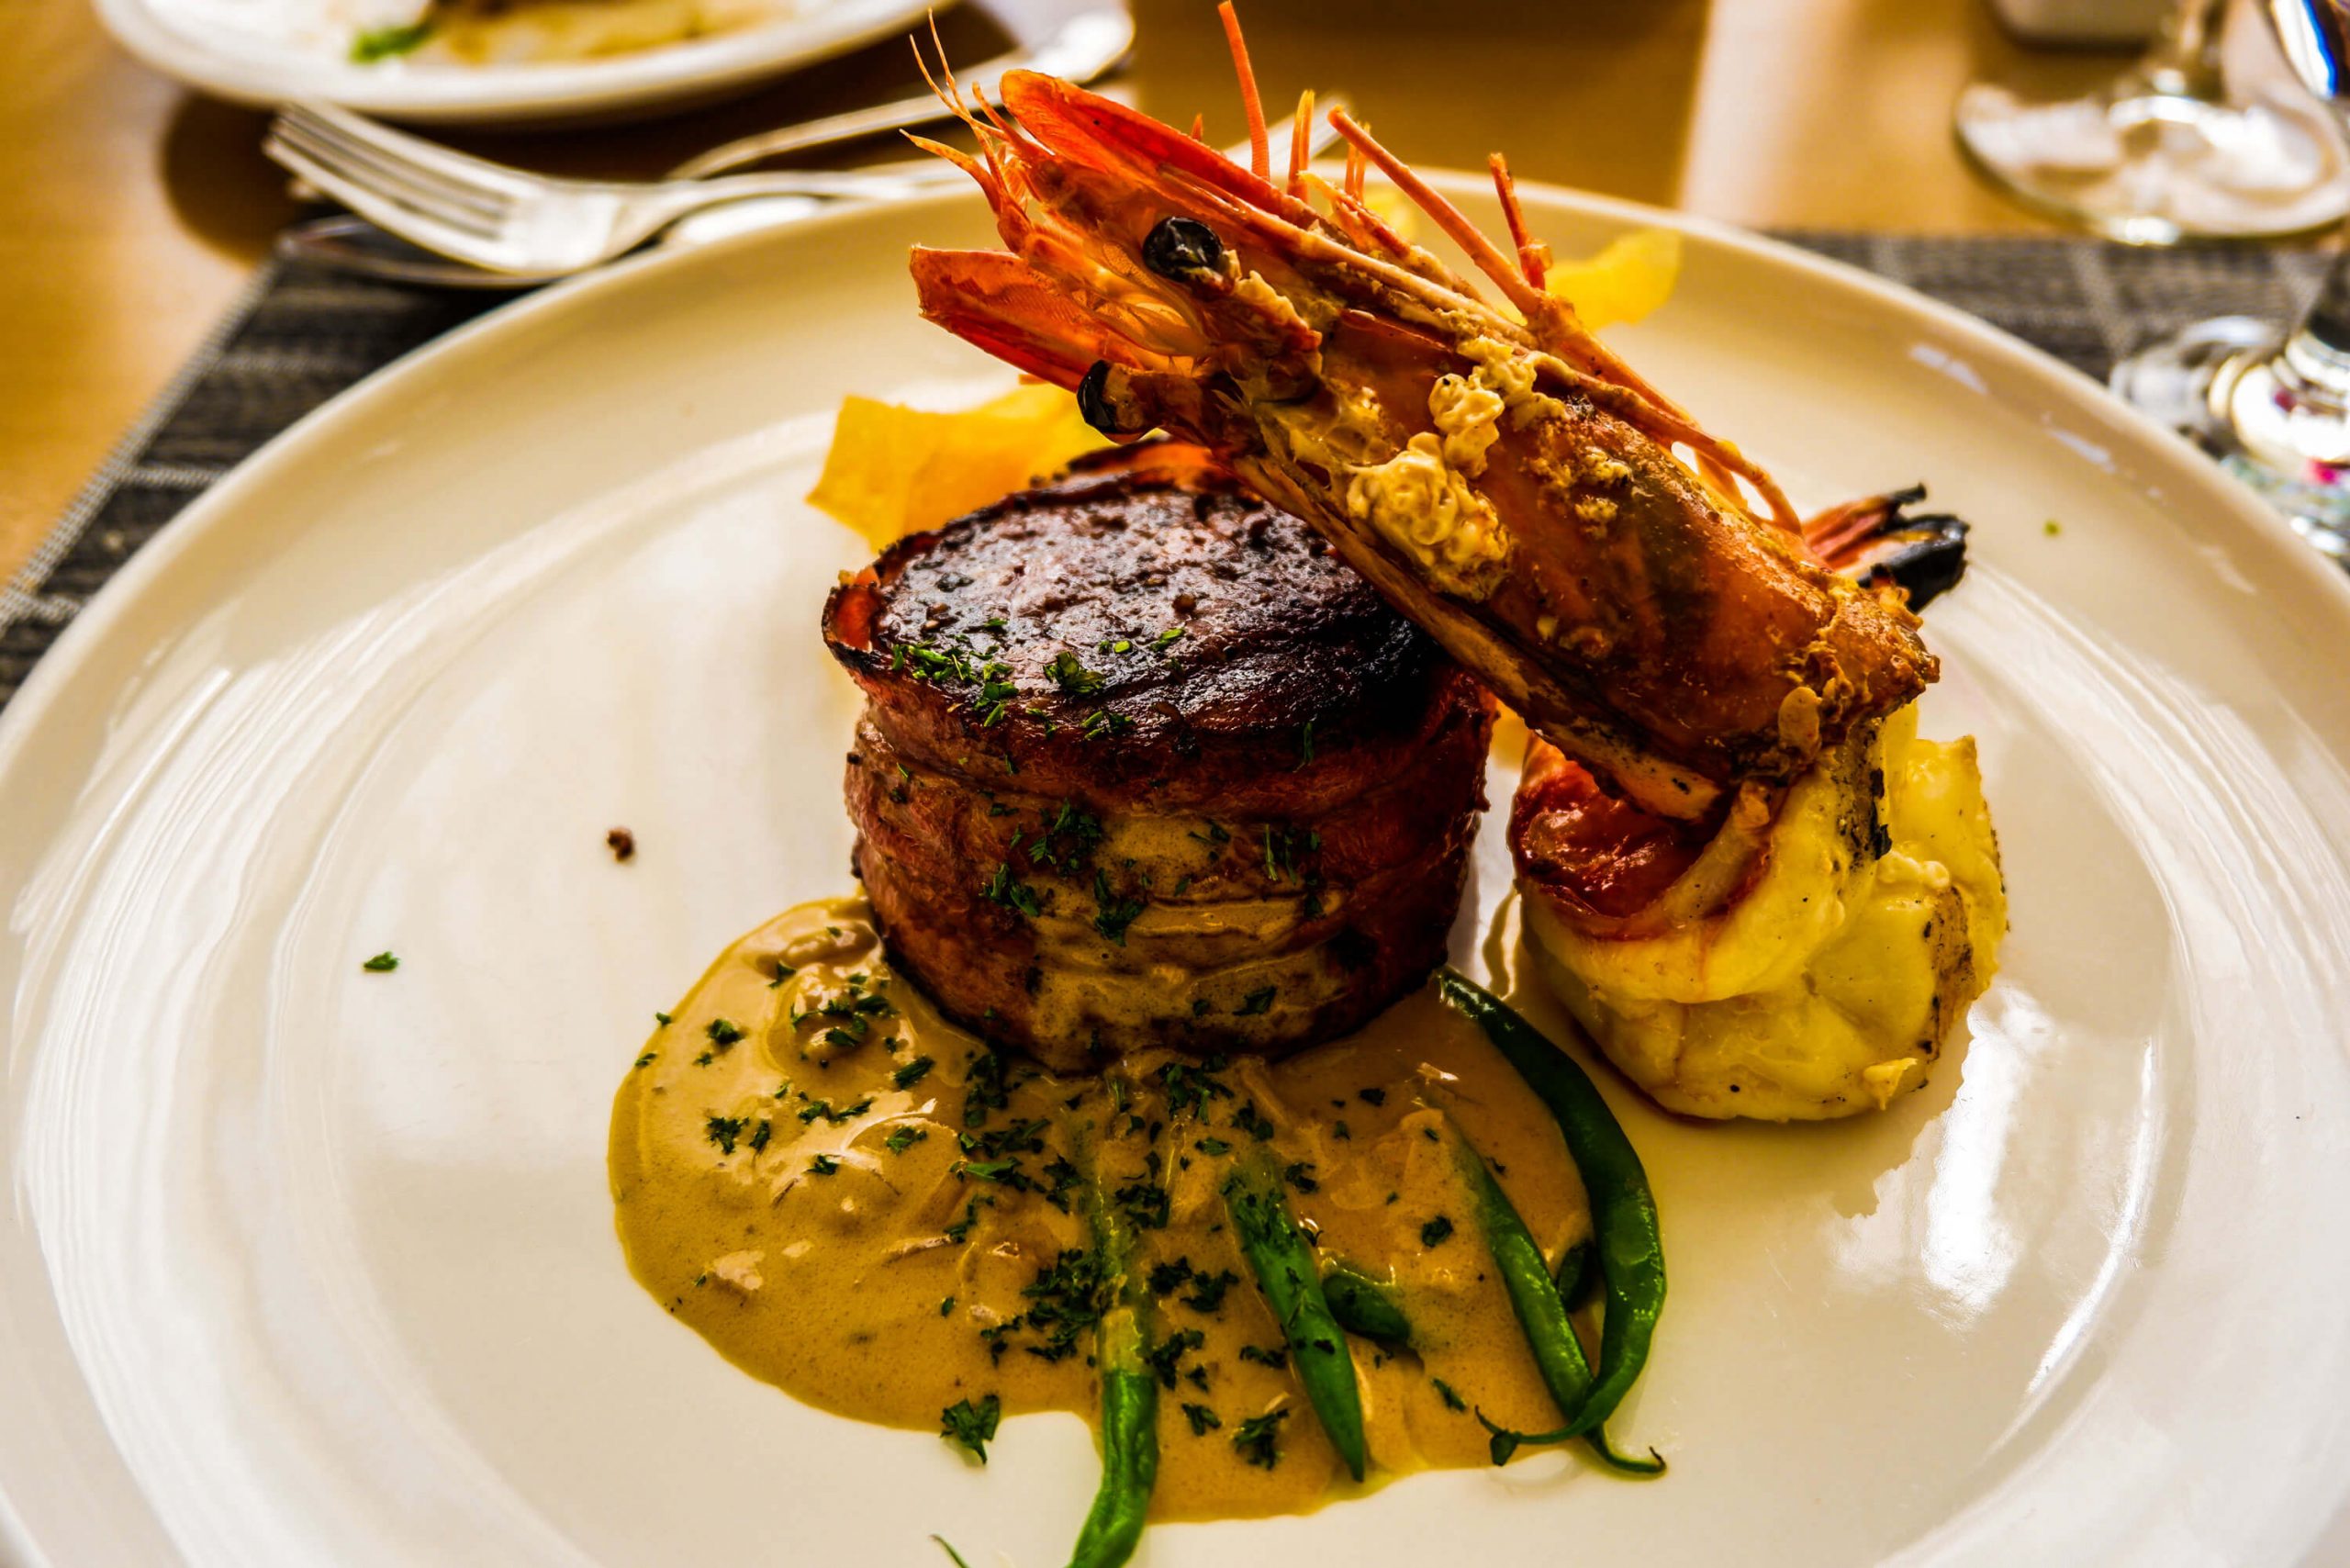 YIN & YANG. Fillet mignon with grilled prawn and crispy layered potatoes. The dish is of wagyu fillet mignon and prawn grilled and seasoned to perfection, served with mushroom sauce.